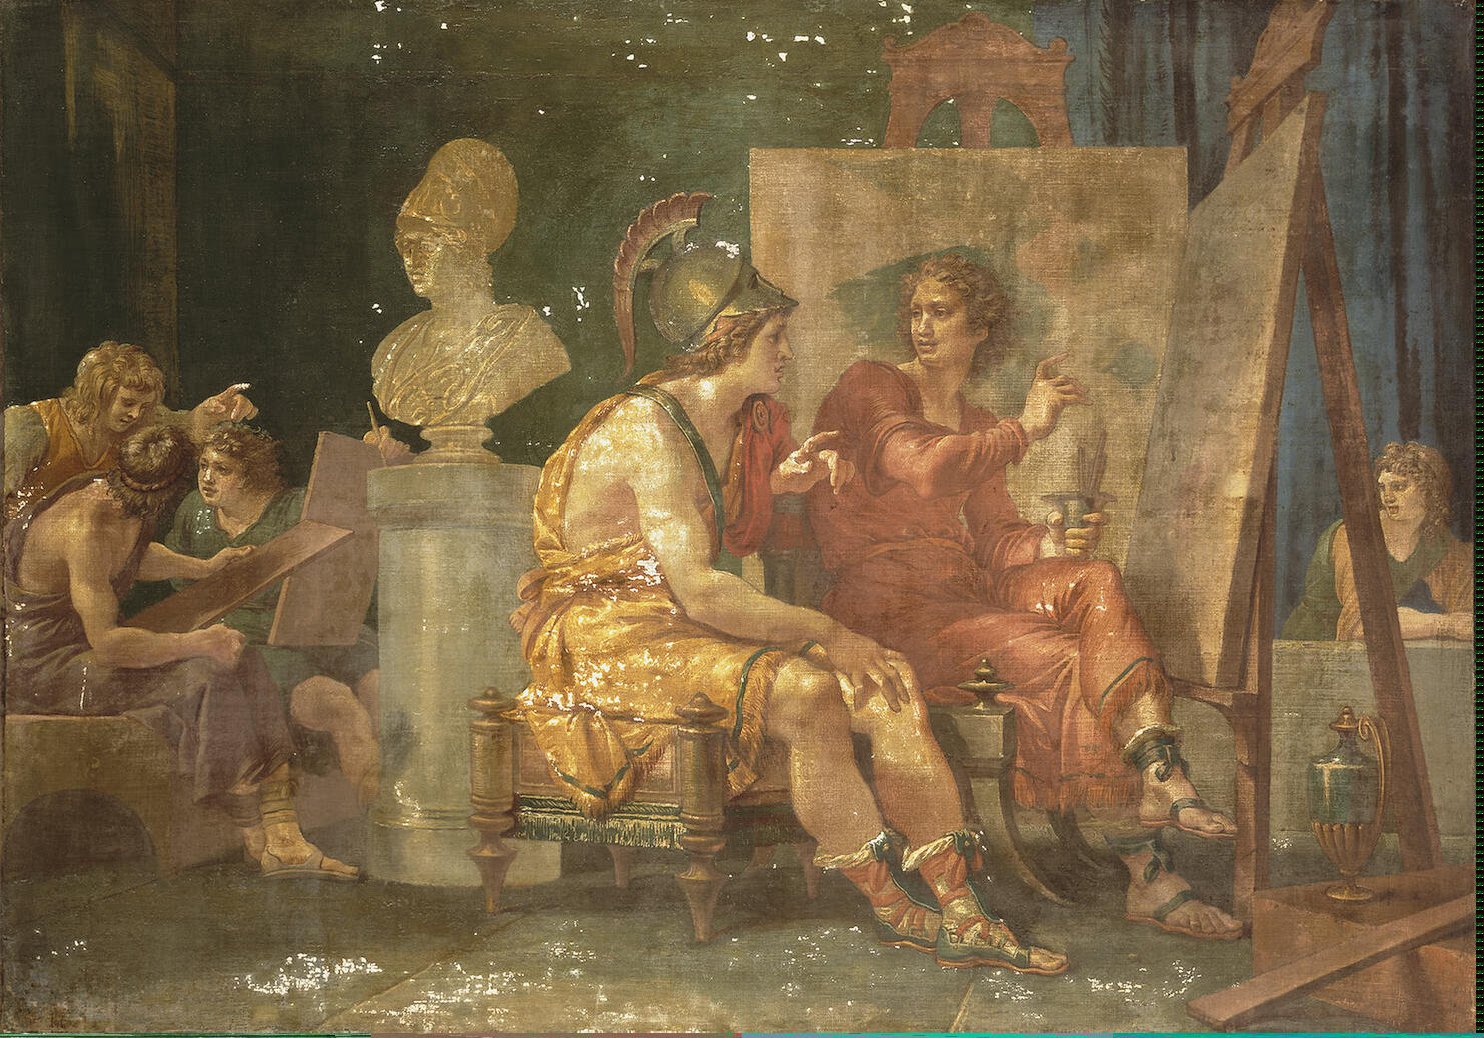 Alexander and Apelles